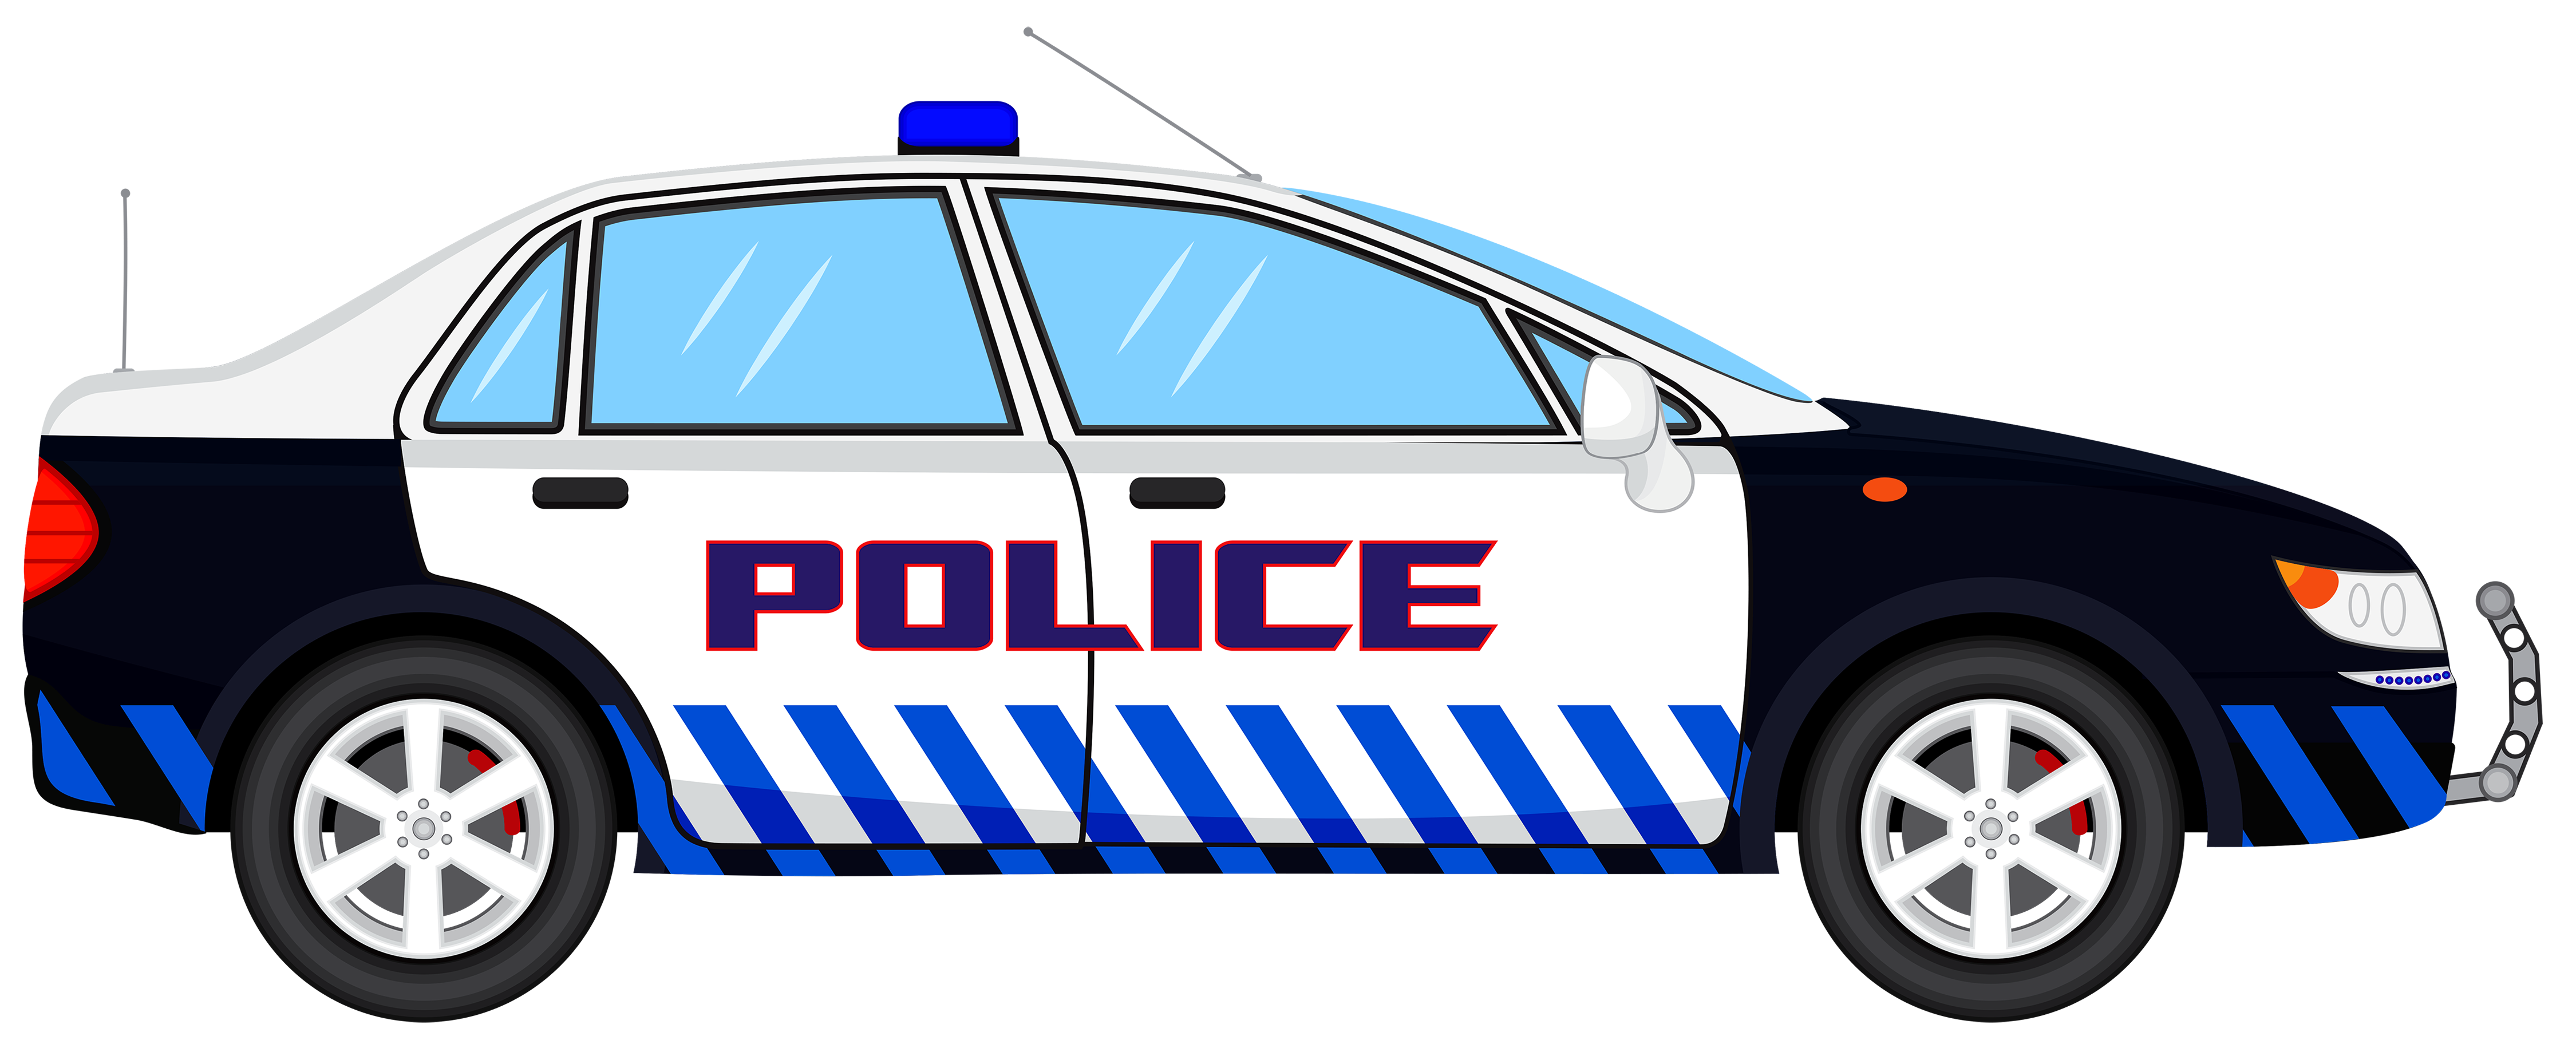 Police car clipart free images.